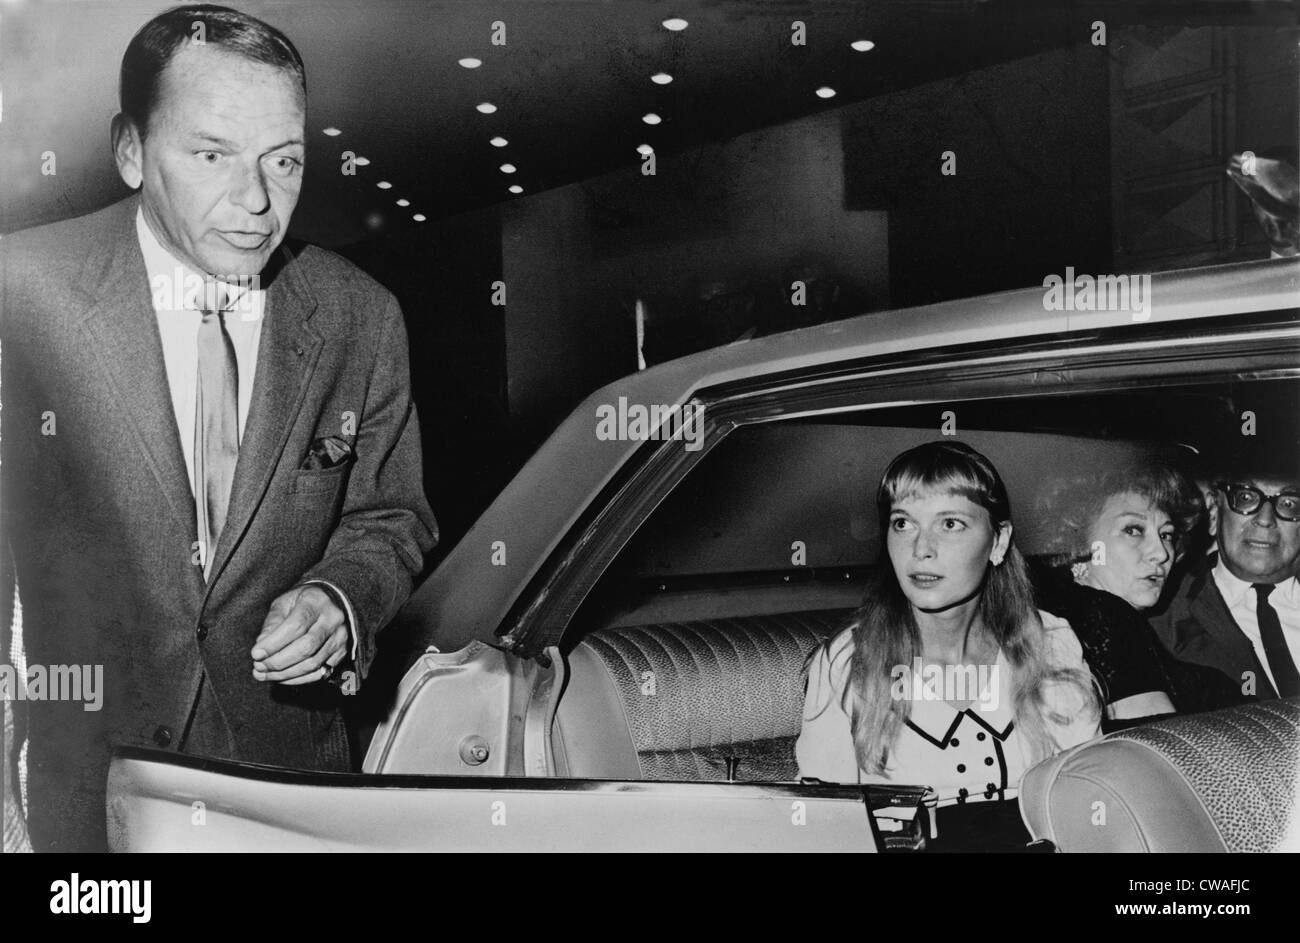 Frank Sinatra (1915-98) and Mia Farrow (b. 1945) prepare to leave the Schubert Theater in New York, in August 1965.  The couple Stock Photo